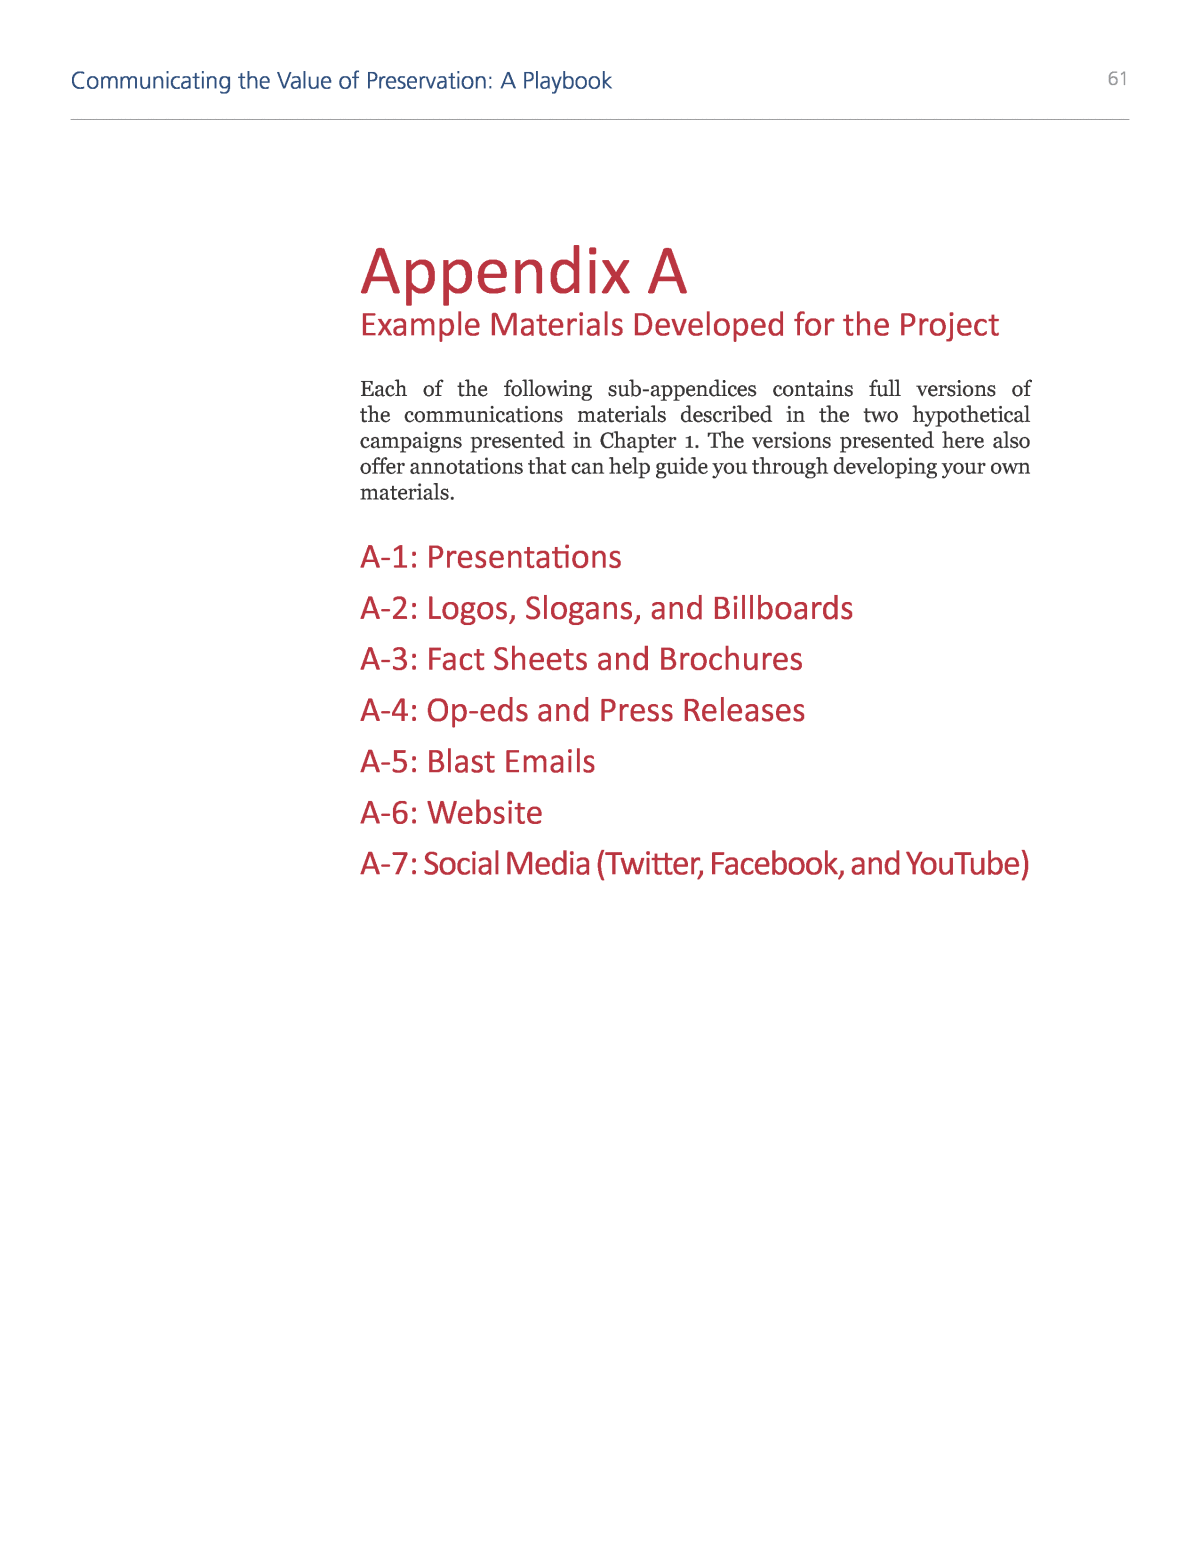 Appendix A. Example Materials Developed for the Project | Communicating the Value of ...